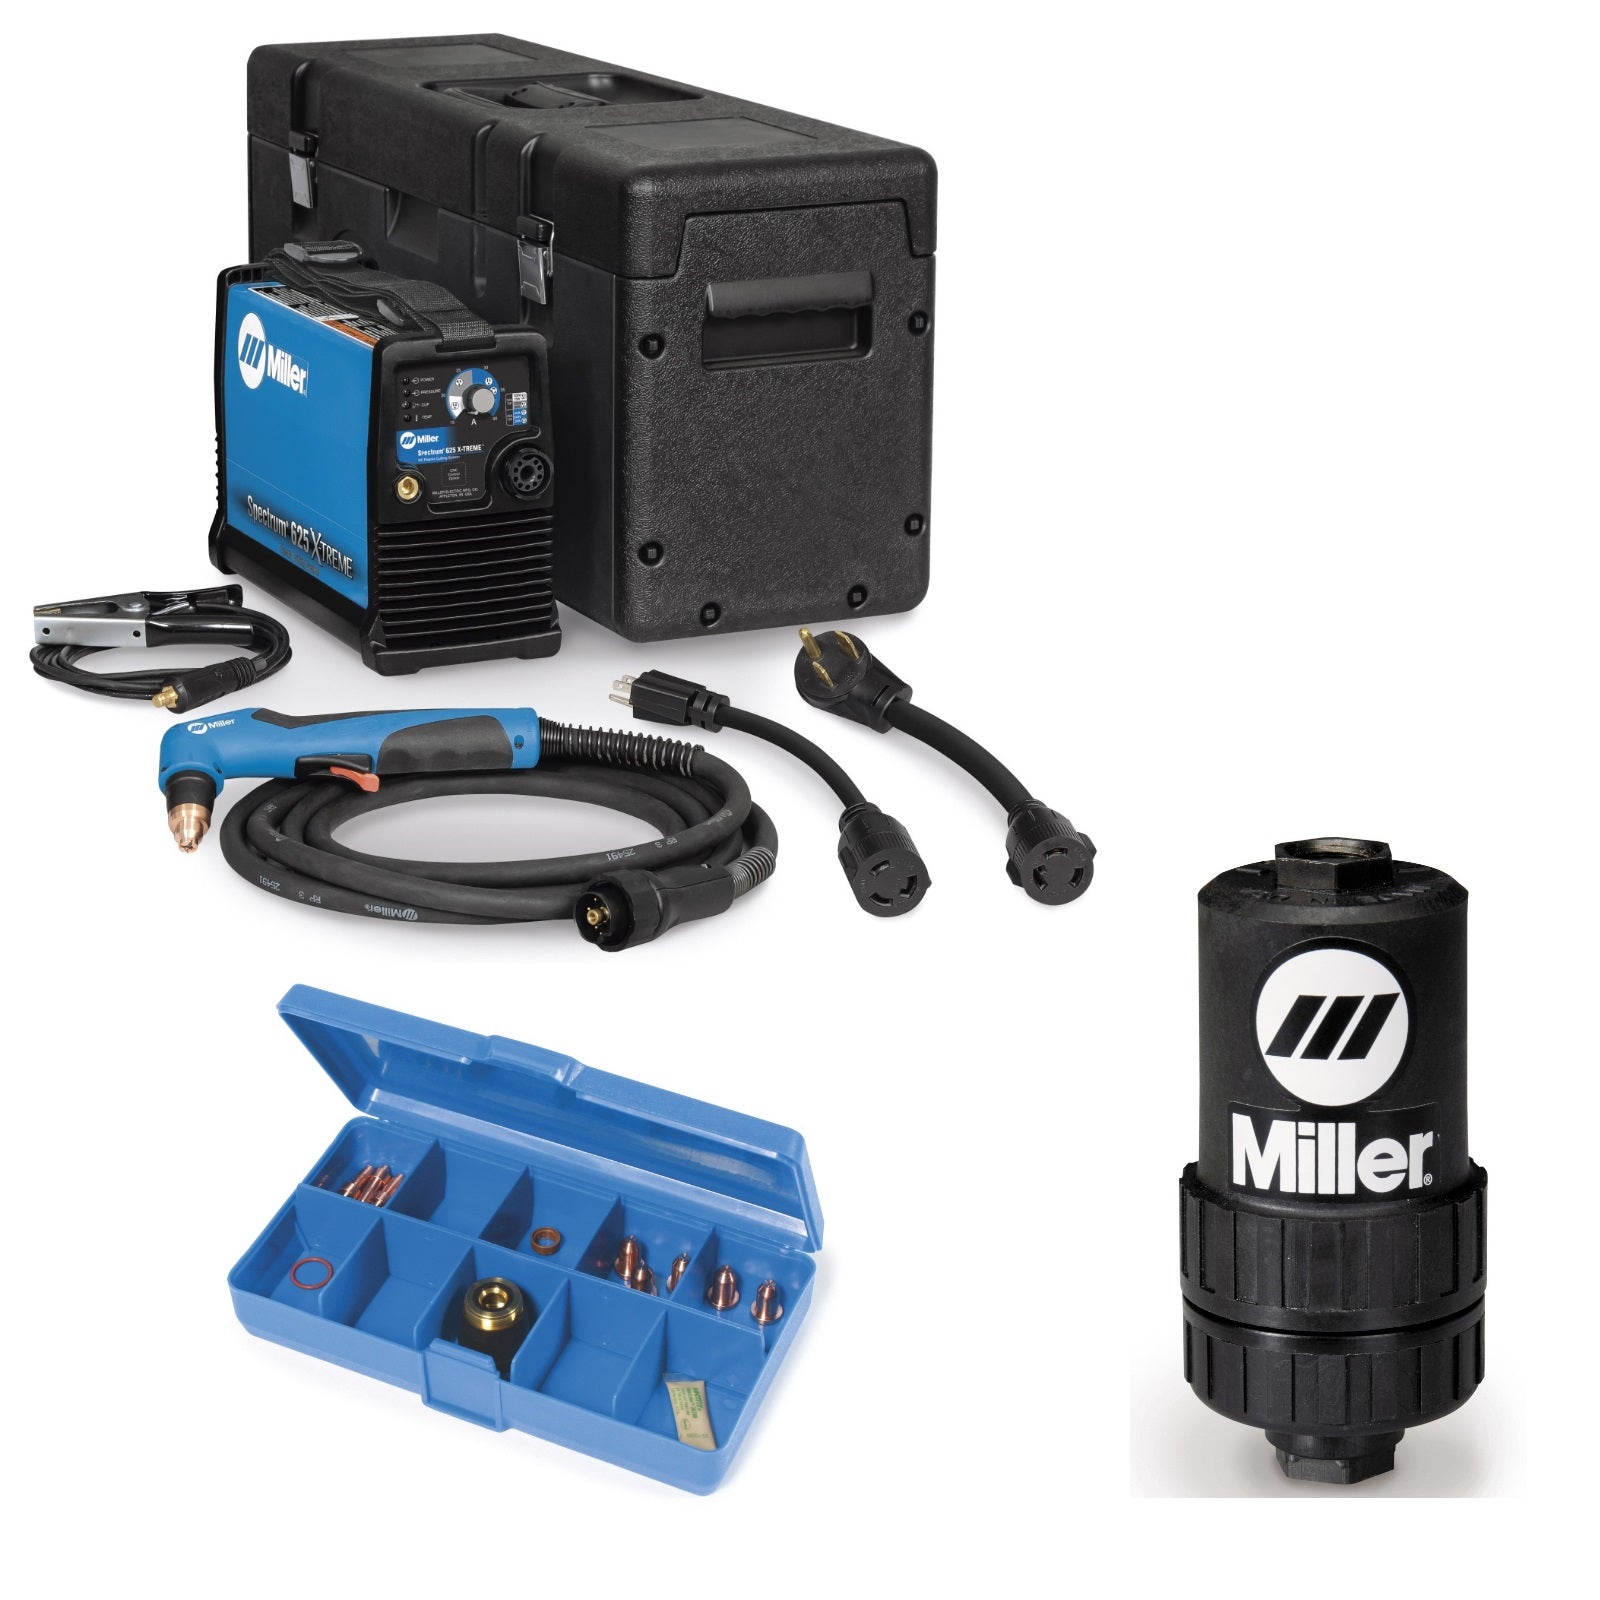 Miller Spectrum 625 X-Treme Plasma Cutter with 12 ft. Torch (907579), Consumables and Air Filter